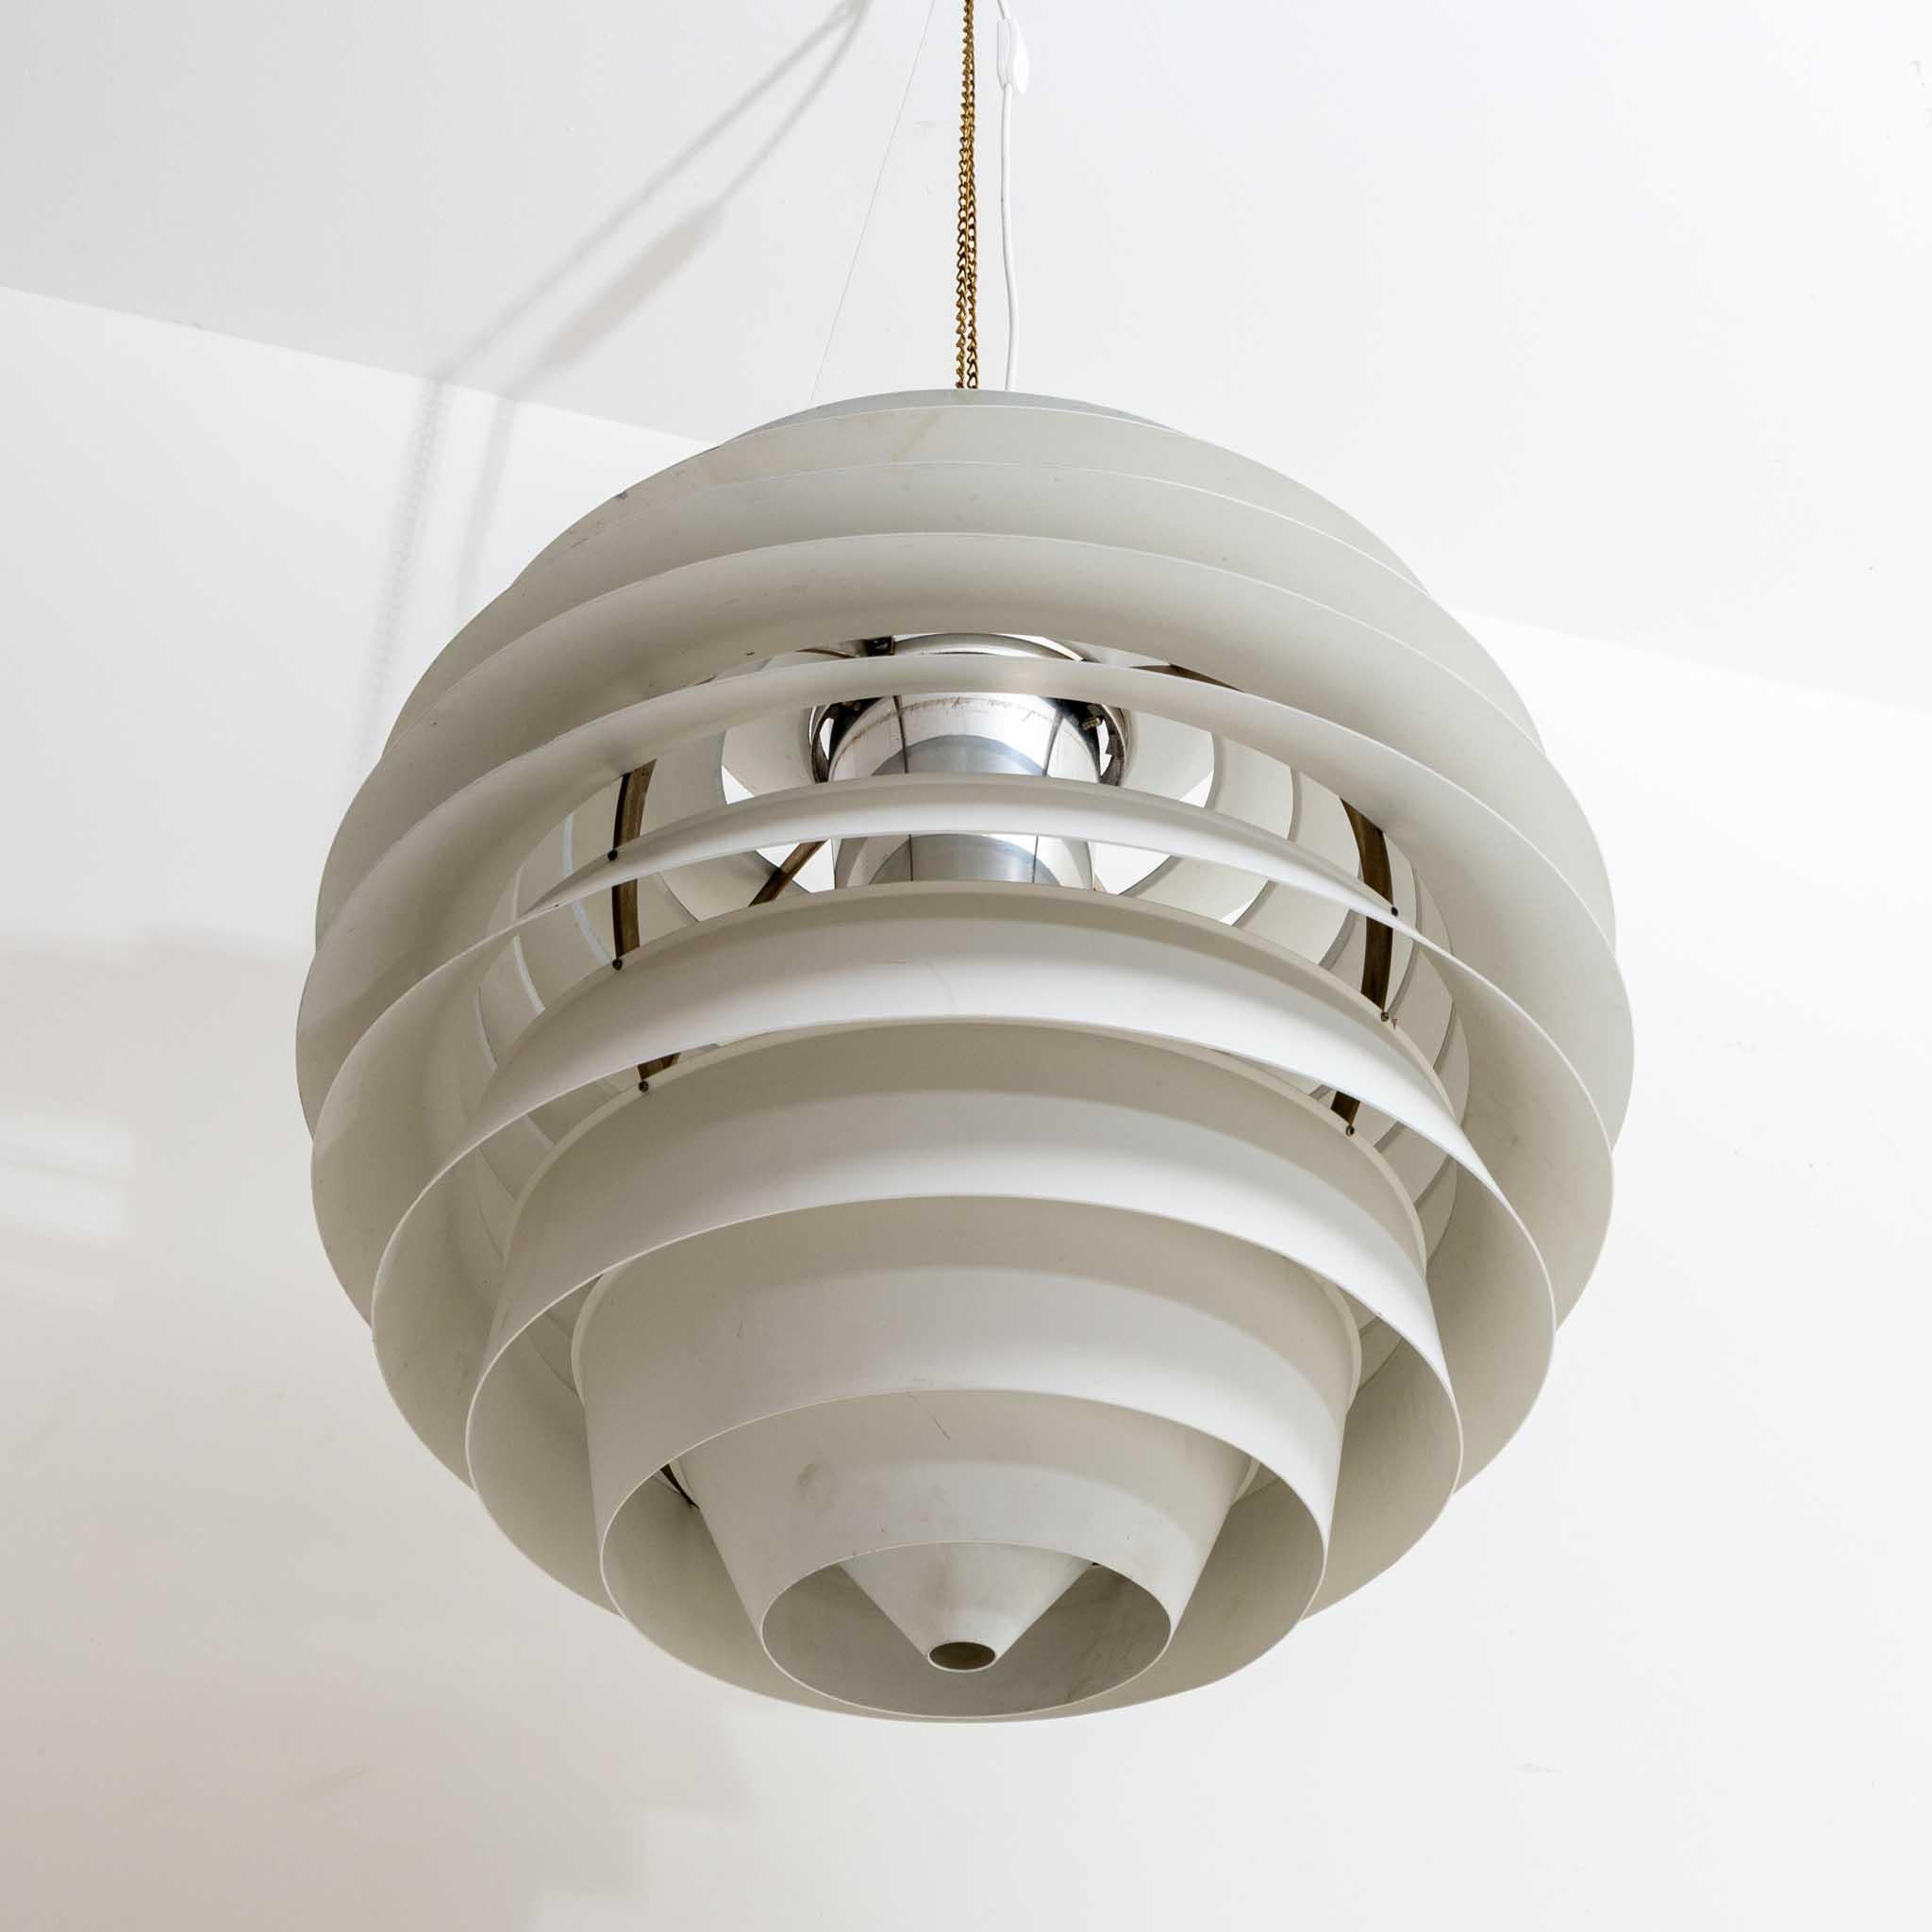 Mid-20th Century Louvre hanging lamp by Poul Henningsen for Louis Poulsen, 1960s